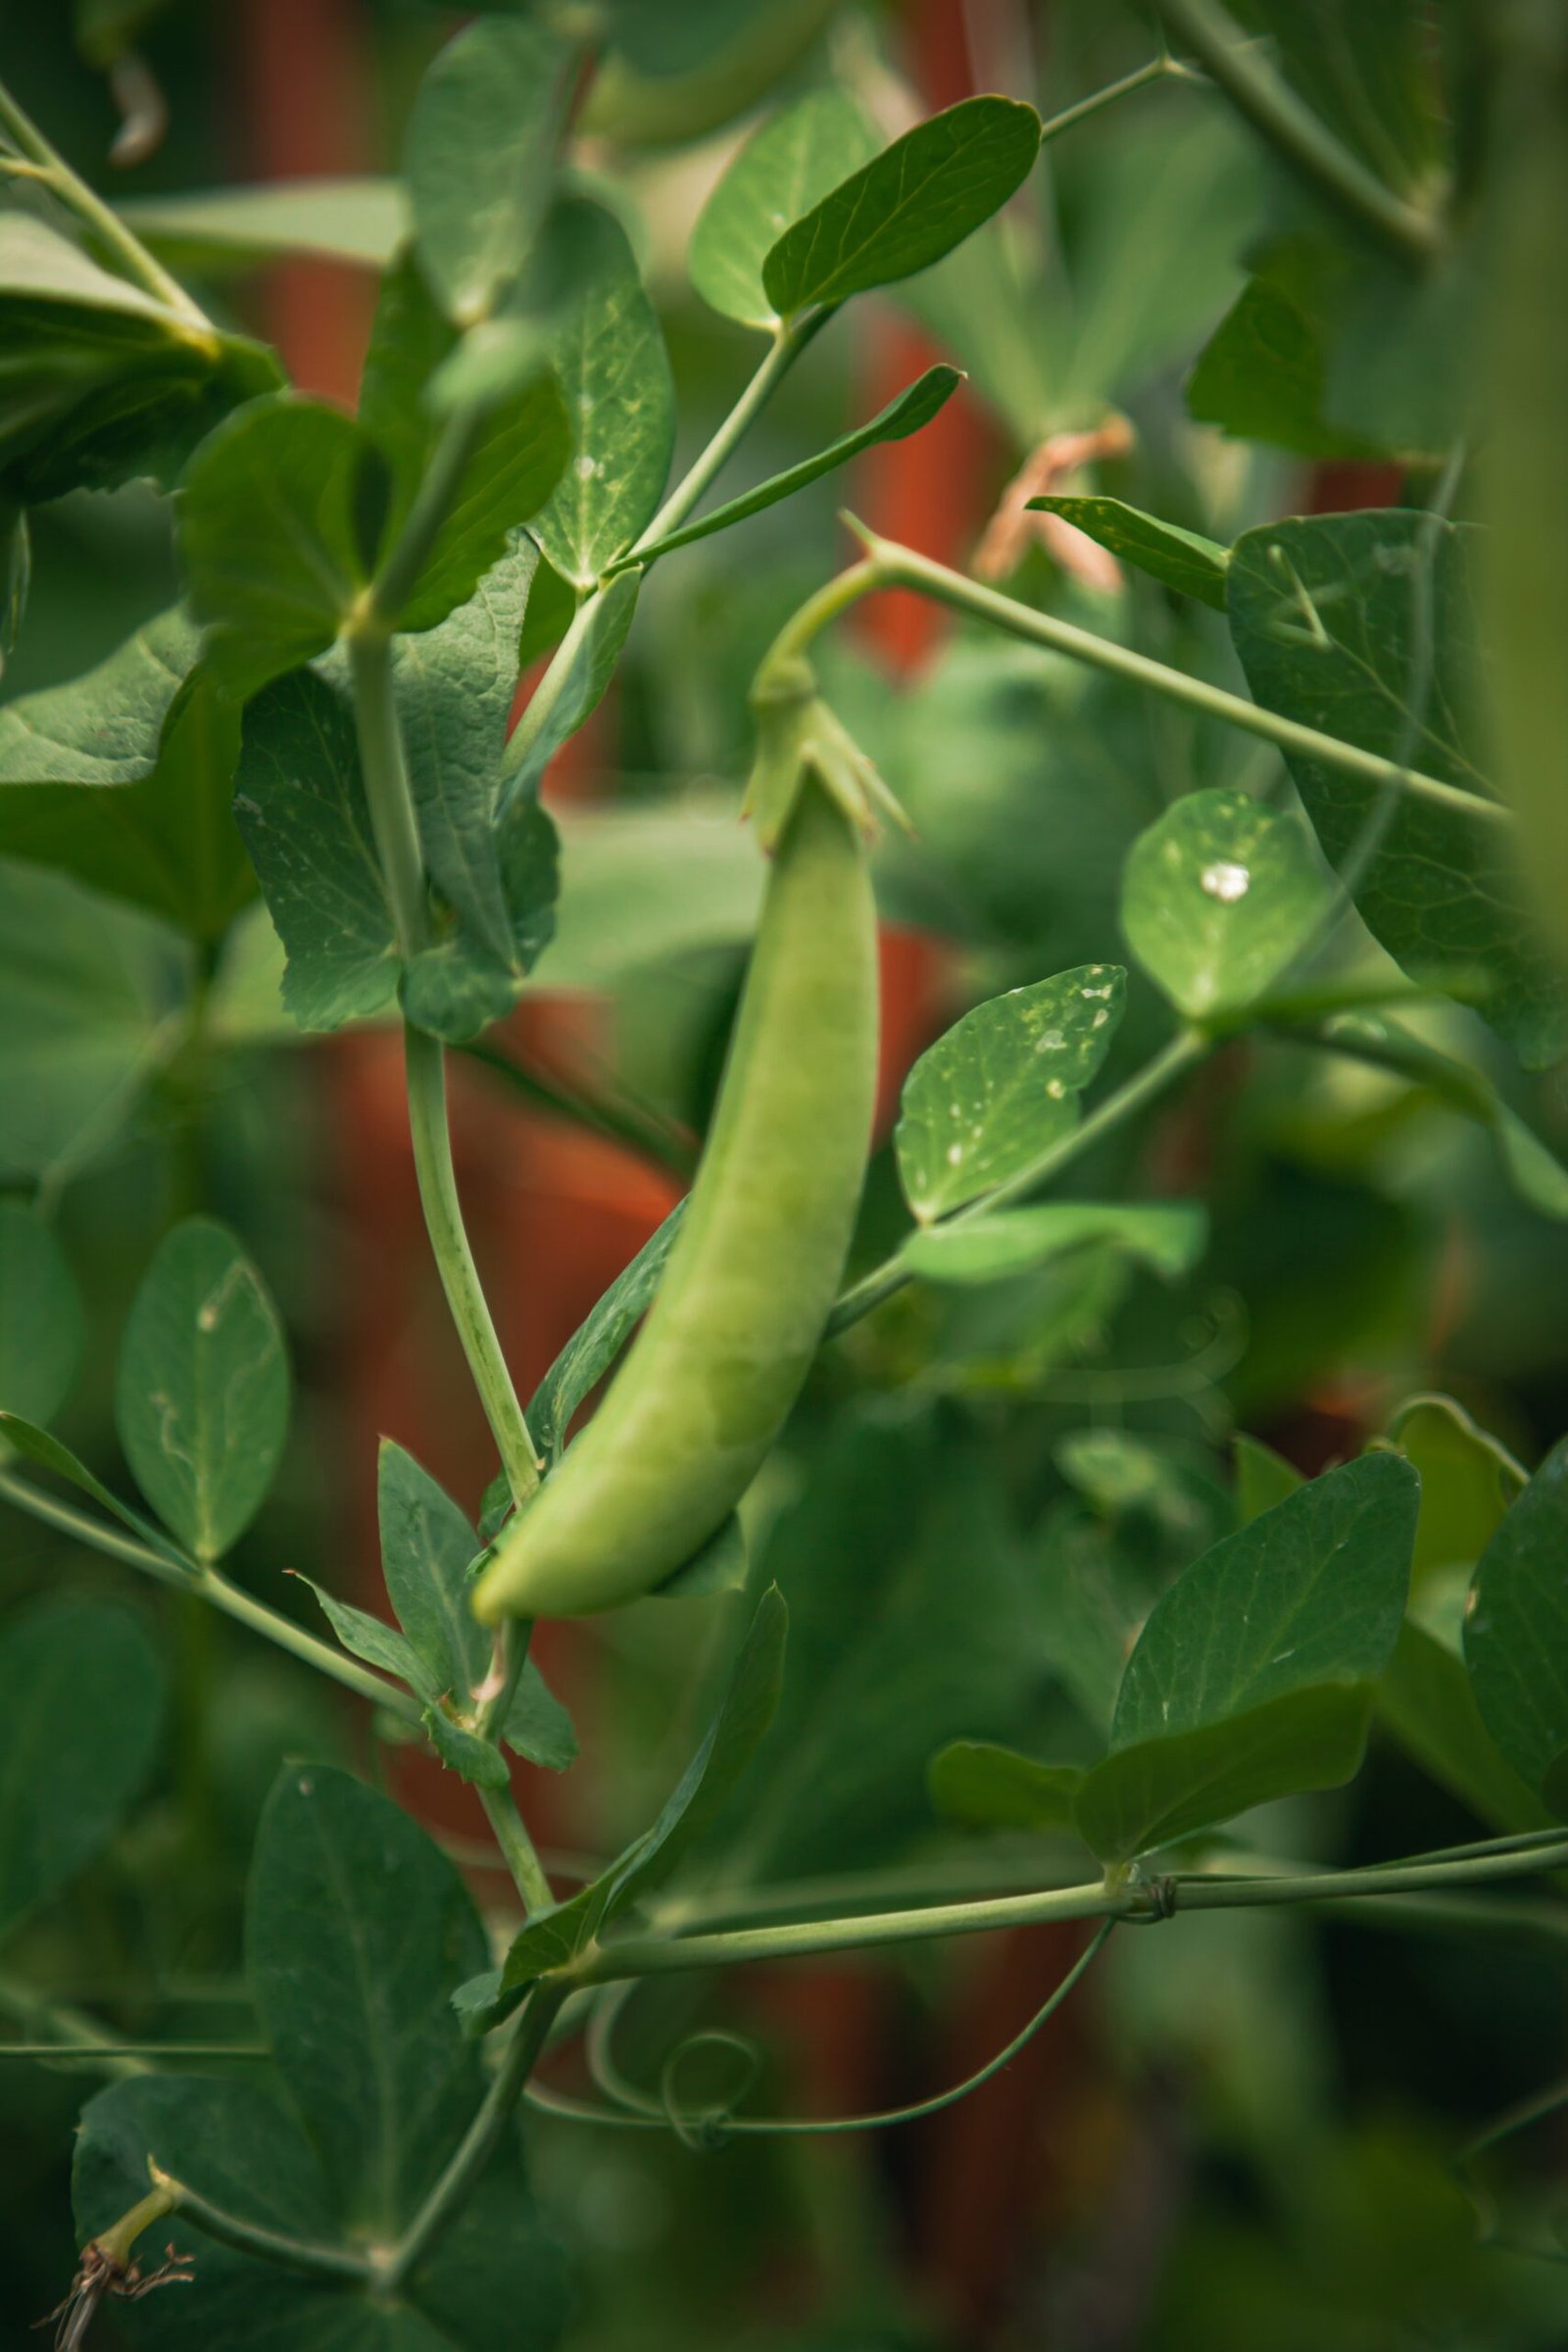 The Green Peas Seeds: A Nutritional Powerhouse for Your Garden